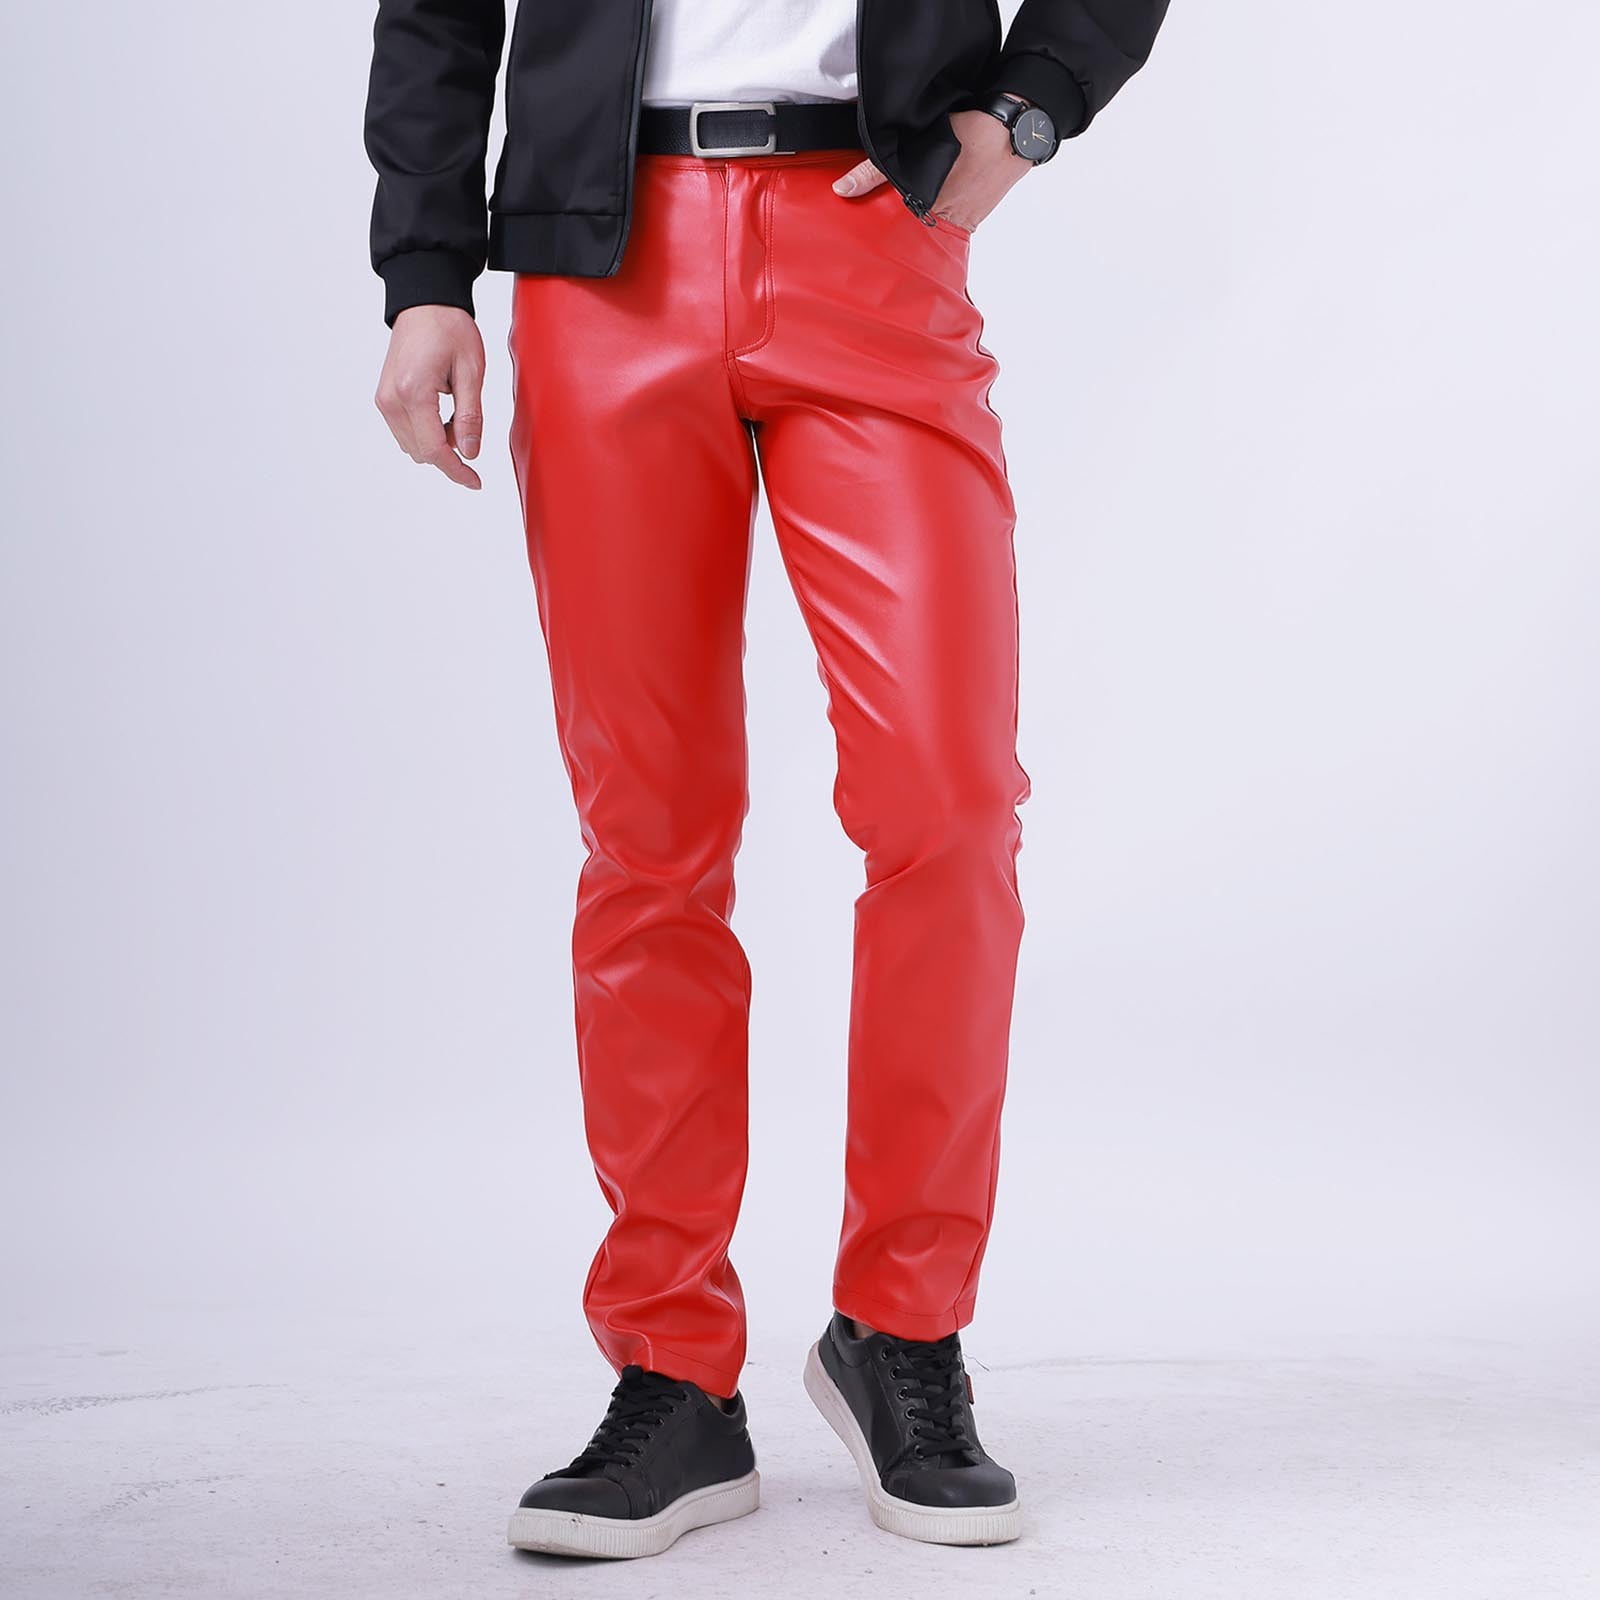 Red hot summer  Red leather pants, Mens leather pants, Leather fashion men